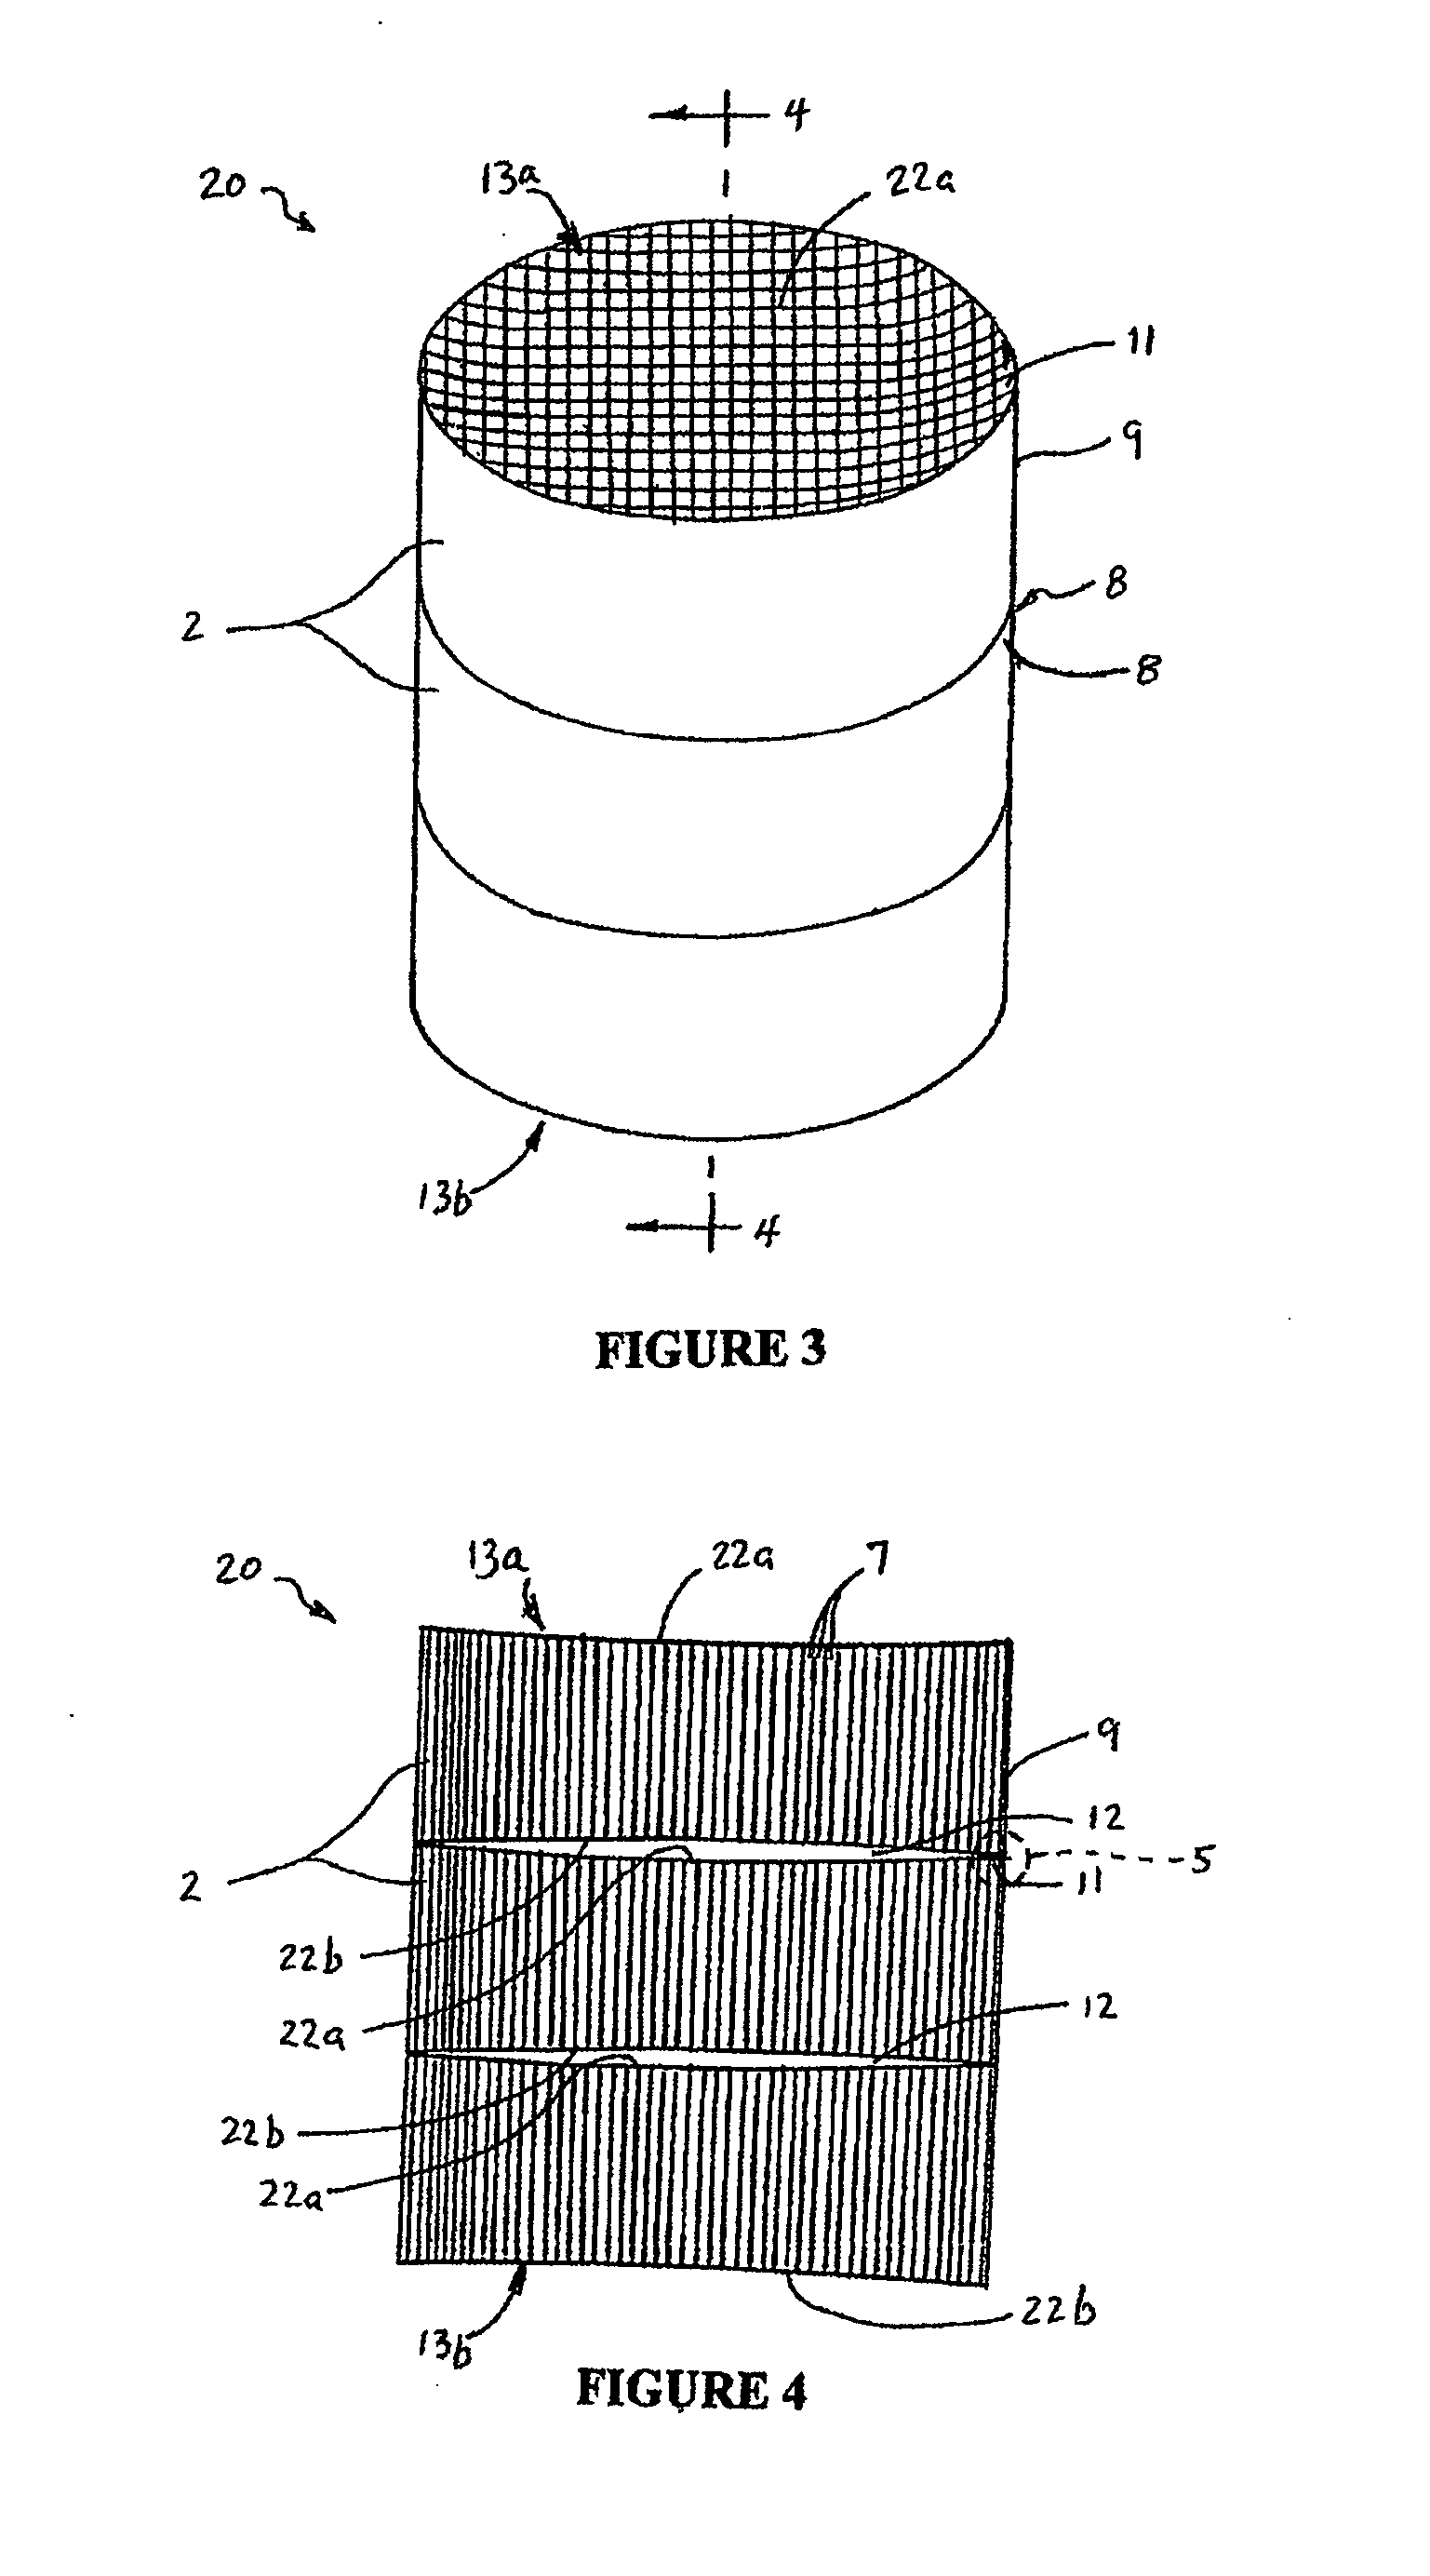 Fluid treatment device having multiple layer honeycomb structure and method of manufacture